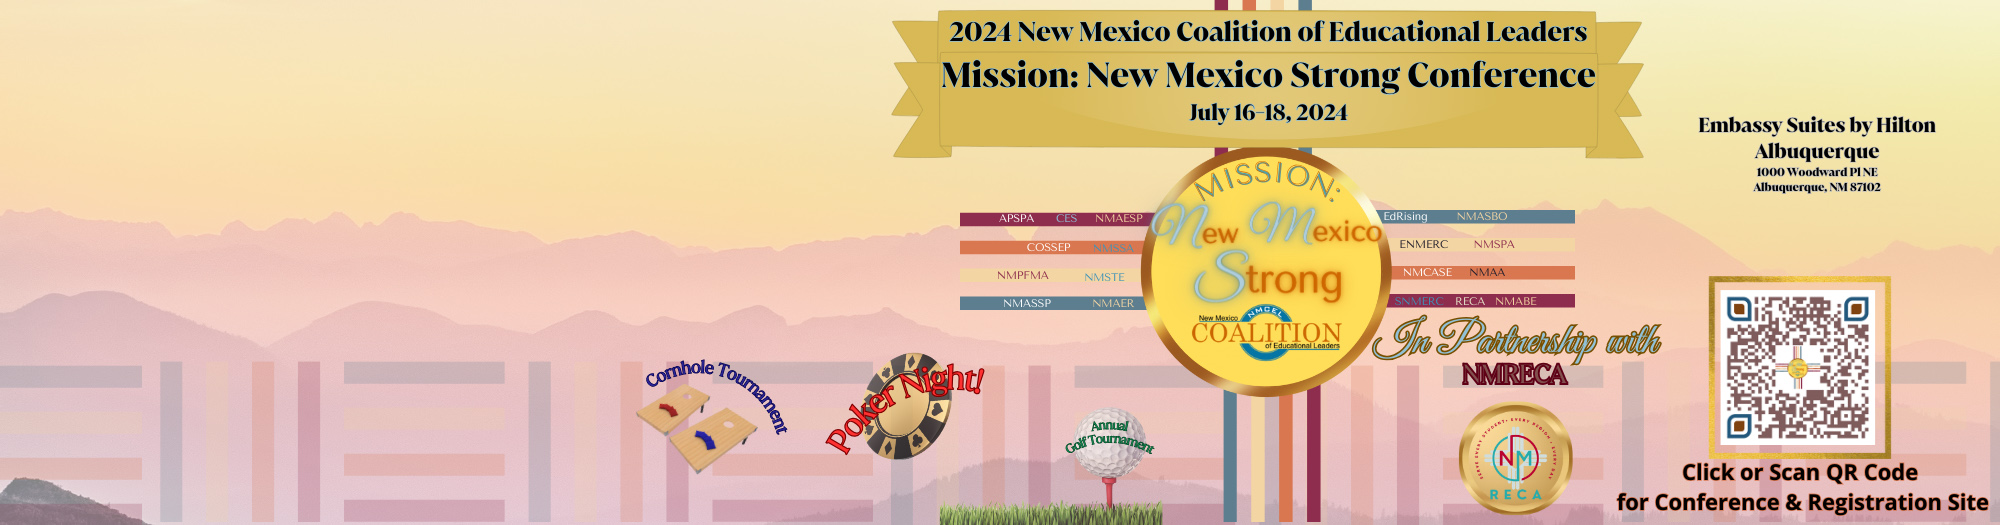 2024 New Mexico Coalition of Educational Leaders - Mission: New Mexico Strong Conference - July 16-18, 2024 - Embassy Suites by Hilton Albuquerque 1000 Woddward PINE, Albuquerque, NM 87102